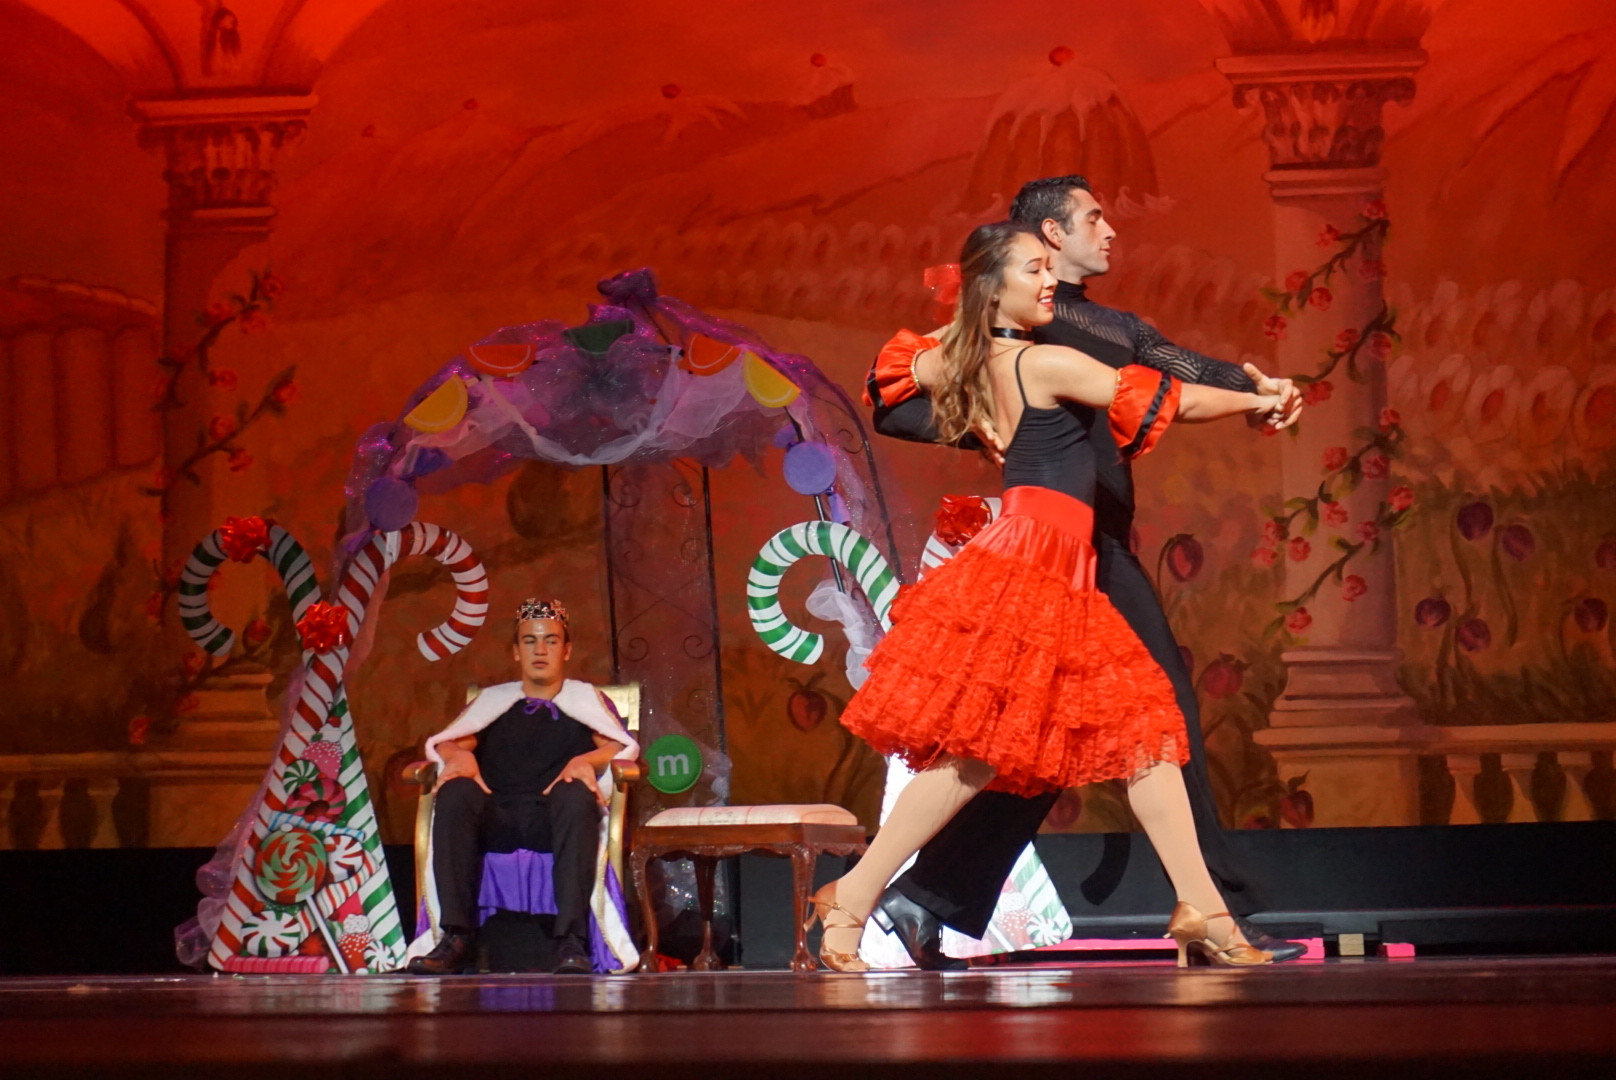 Kiana Lubbers and Peter Guarno perform the Spanish Pas De Deux